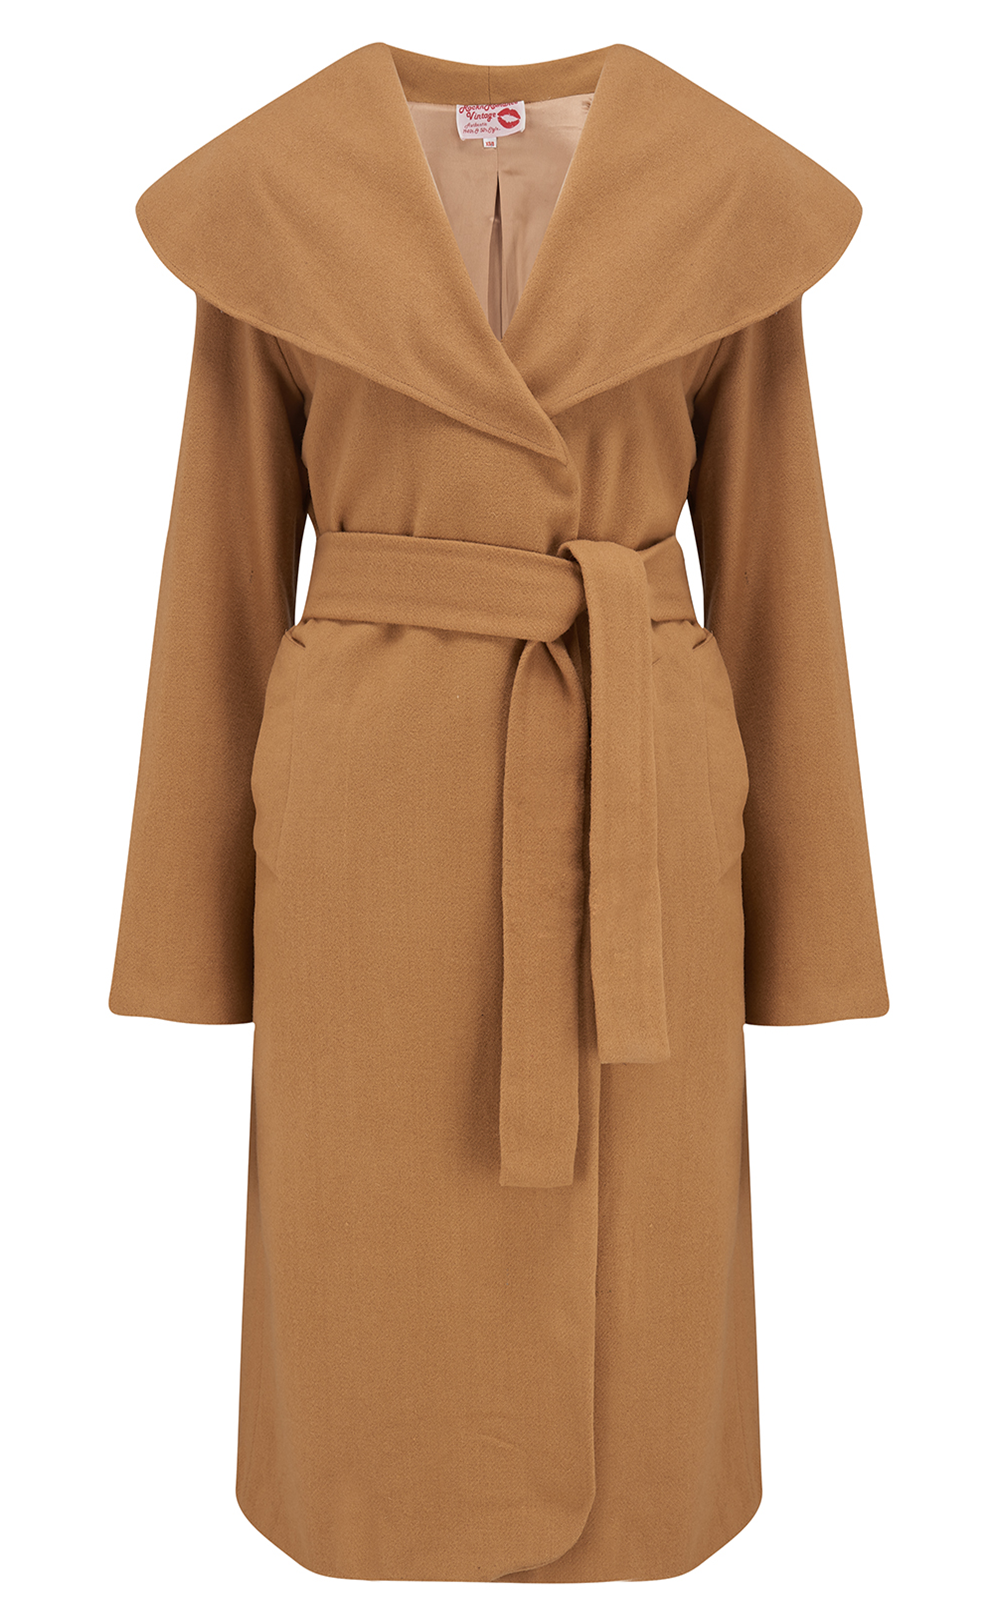 The "Monroe" Wrap Coat in Classic Camel.. True & Authentic Late 1940s, Early 50s Vintage Style - True and authentic vintage style clothing, inspired by the Classic styles of CC41 , WW2 and the fun 1950s RocknRoll era, for everyday wear plus events like Goodwood Revival, Twinwood Festival and Viva Las Vegas Rockabilly Weekend Rock n Romance Rock n Romance